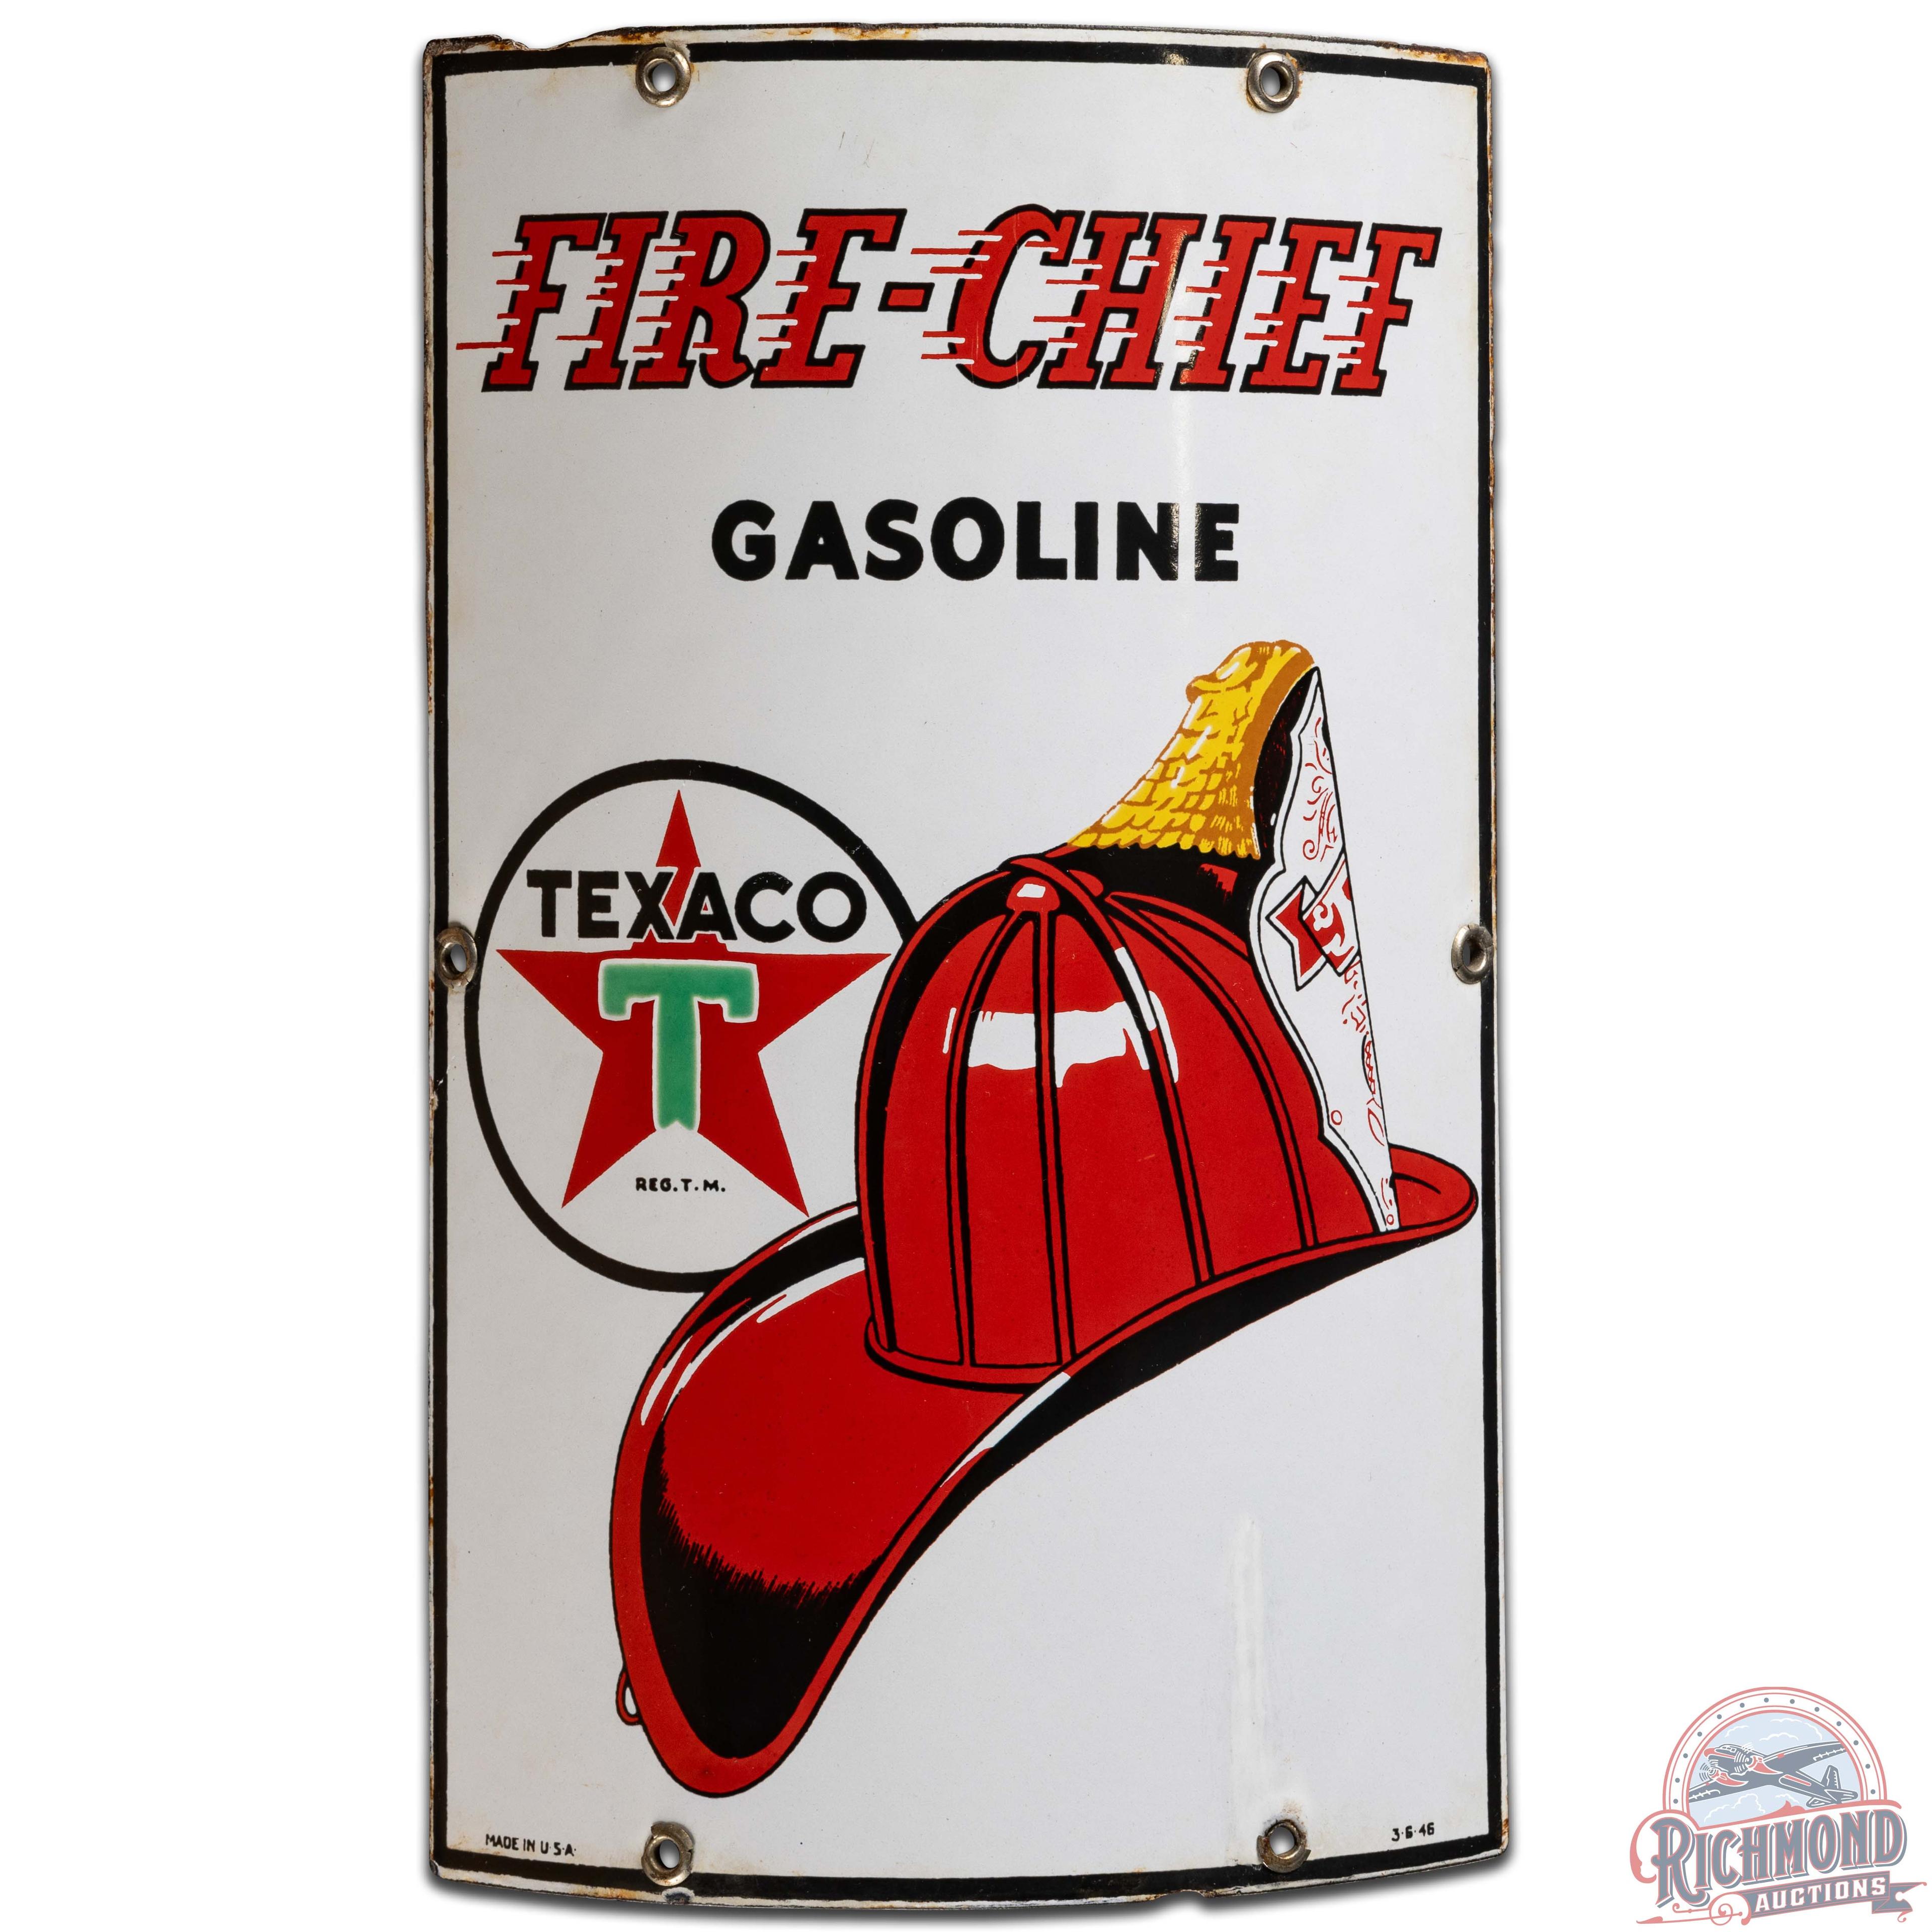 1946 Texaco Fire Chief Gasoline Curved SS Porcelain Gas Pump Plate Sign "Small"